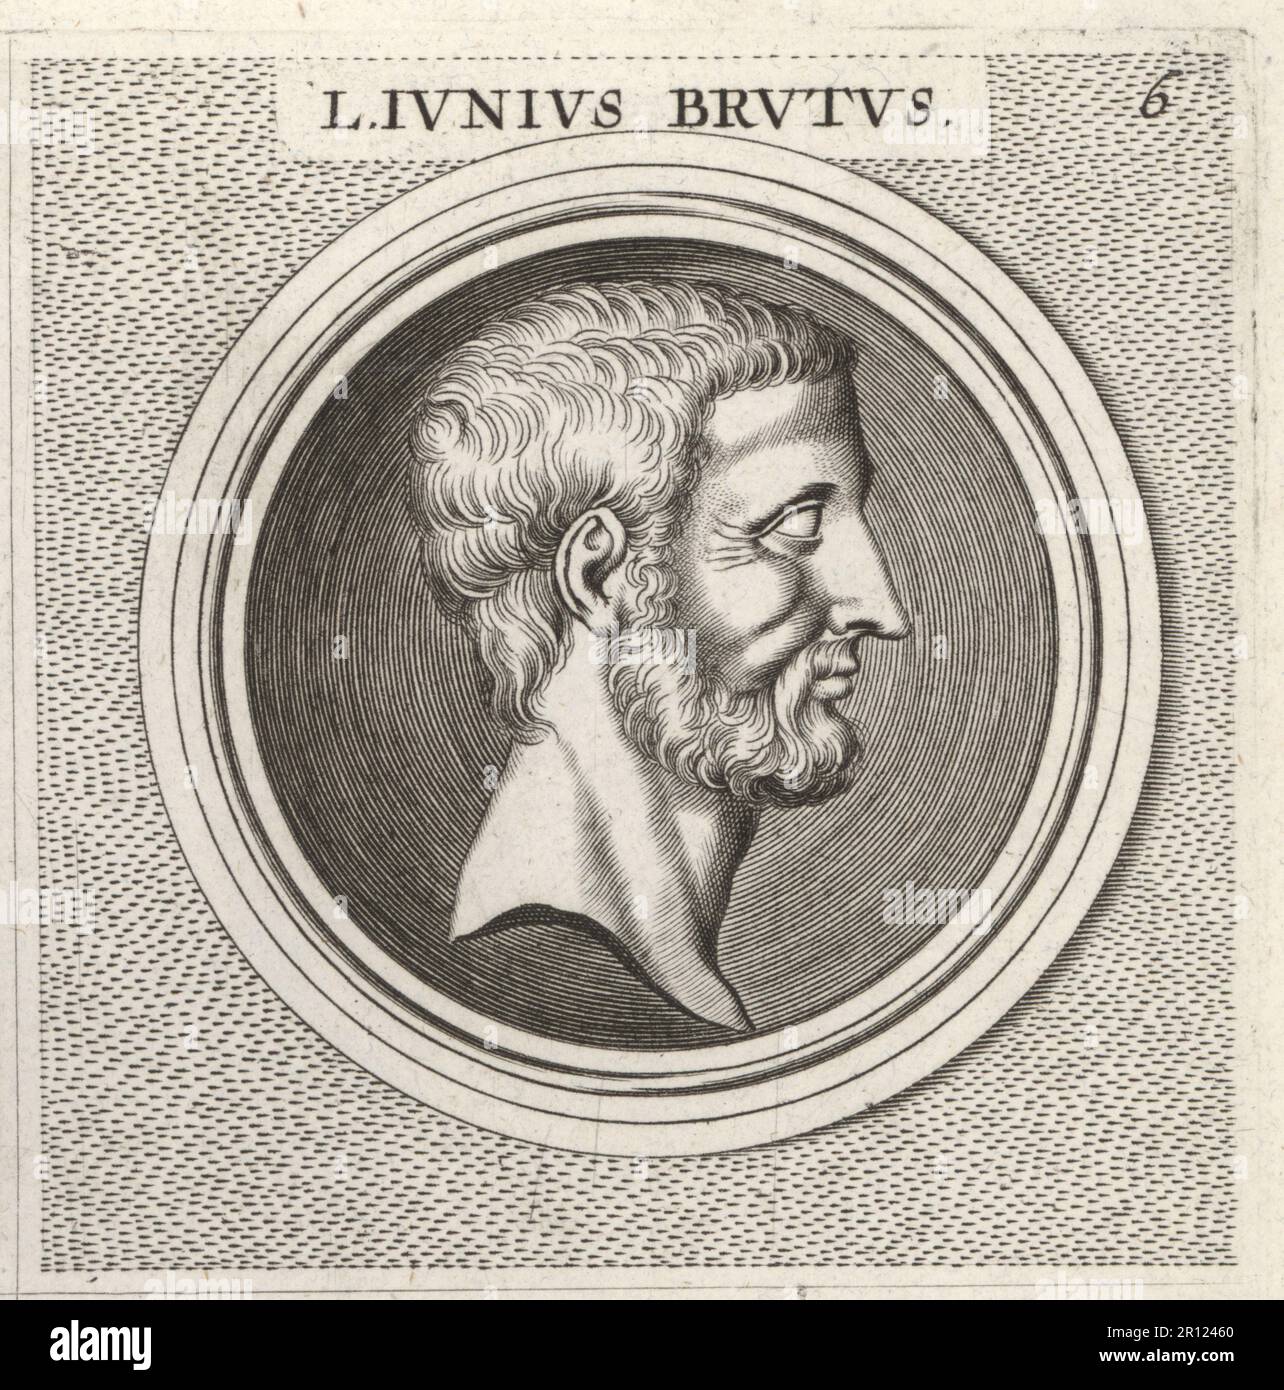 Lucius Junius Brutus, semi-legendary founder of the Roman Republic, 6th century BC. Traditionally one of its first consuls in 509 BC. L. Iunius Brutus. Copperplate engraving after an illustration by Joachim von Sandrart from his L’Academia Todesca, della Architectura, Scultura & Pittura, oder Teutsche Academie, der Edlen Bau- Bild- und Mahlerey-Kunste, German Academy of Architecture, Sculpture and Painting, Jacob von Sandrart, Nuremberg, 1675. Stock Photo